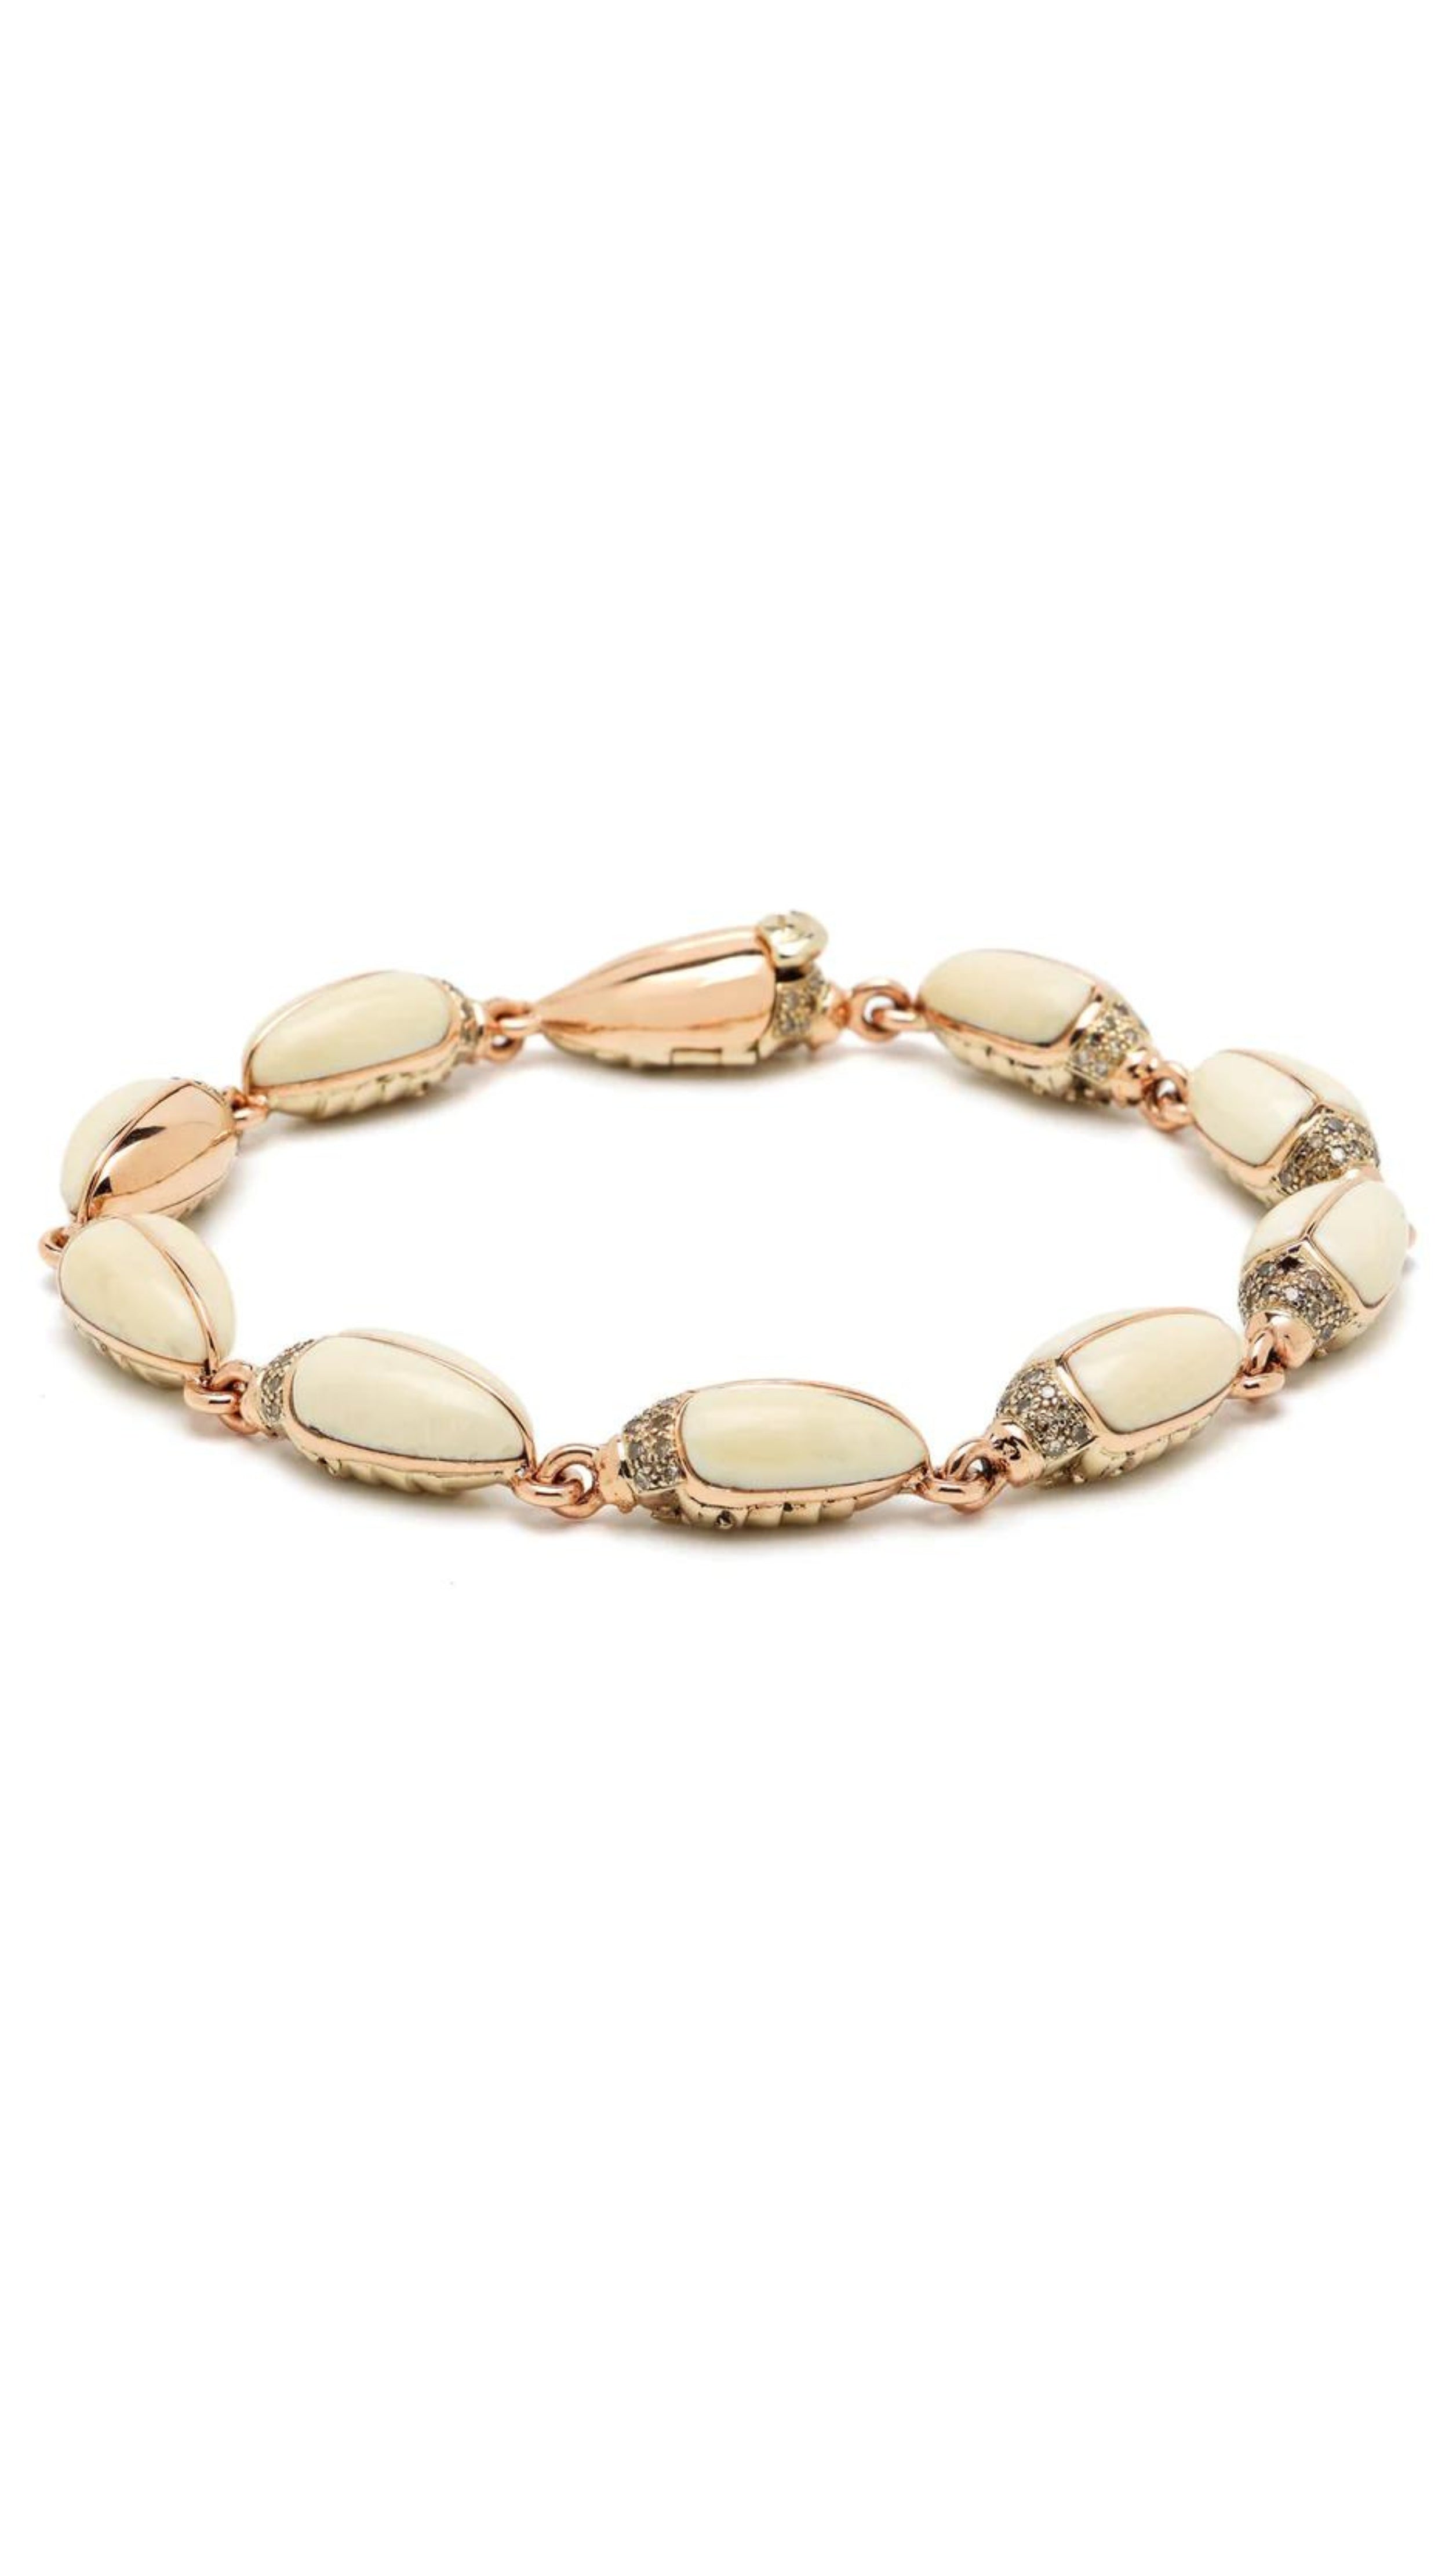 xWinter Mammoth Scarab Bracelet is made from creamy tones of polished and carved mammoth tusk, 18k yellow gold, 925 sterling silver, and brown diamonds. Individual scarabs are linked together. Shown from the side.